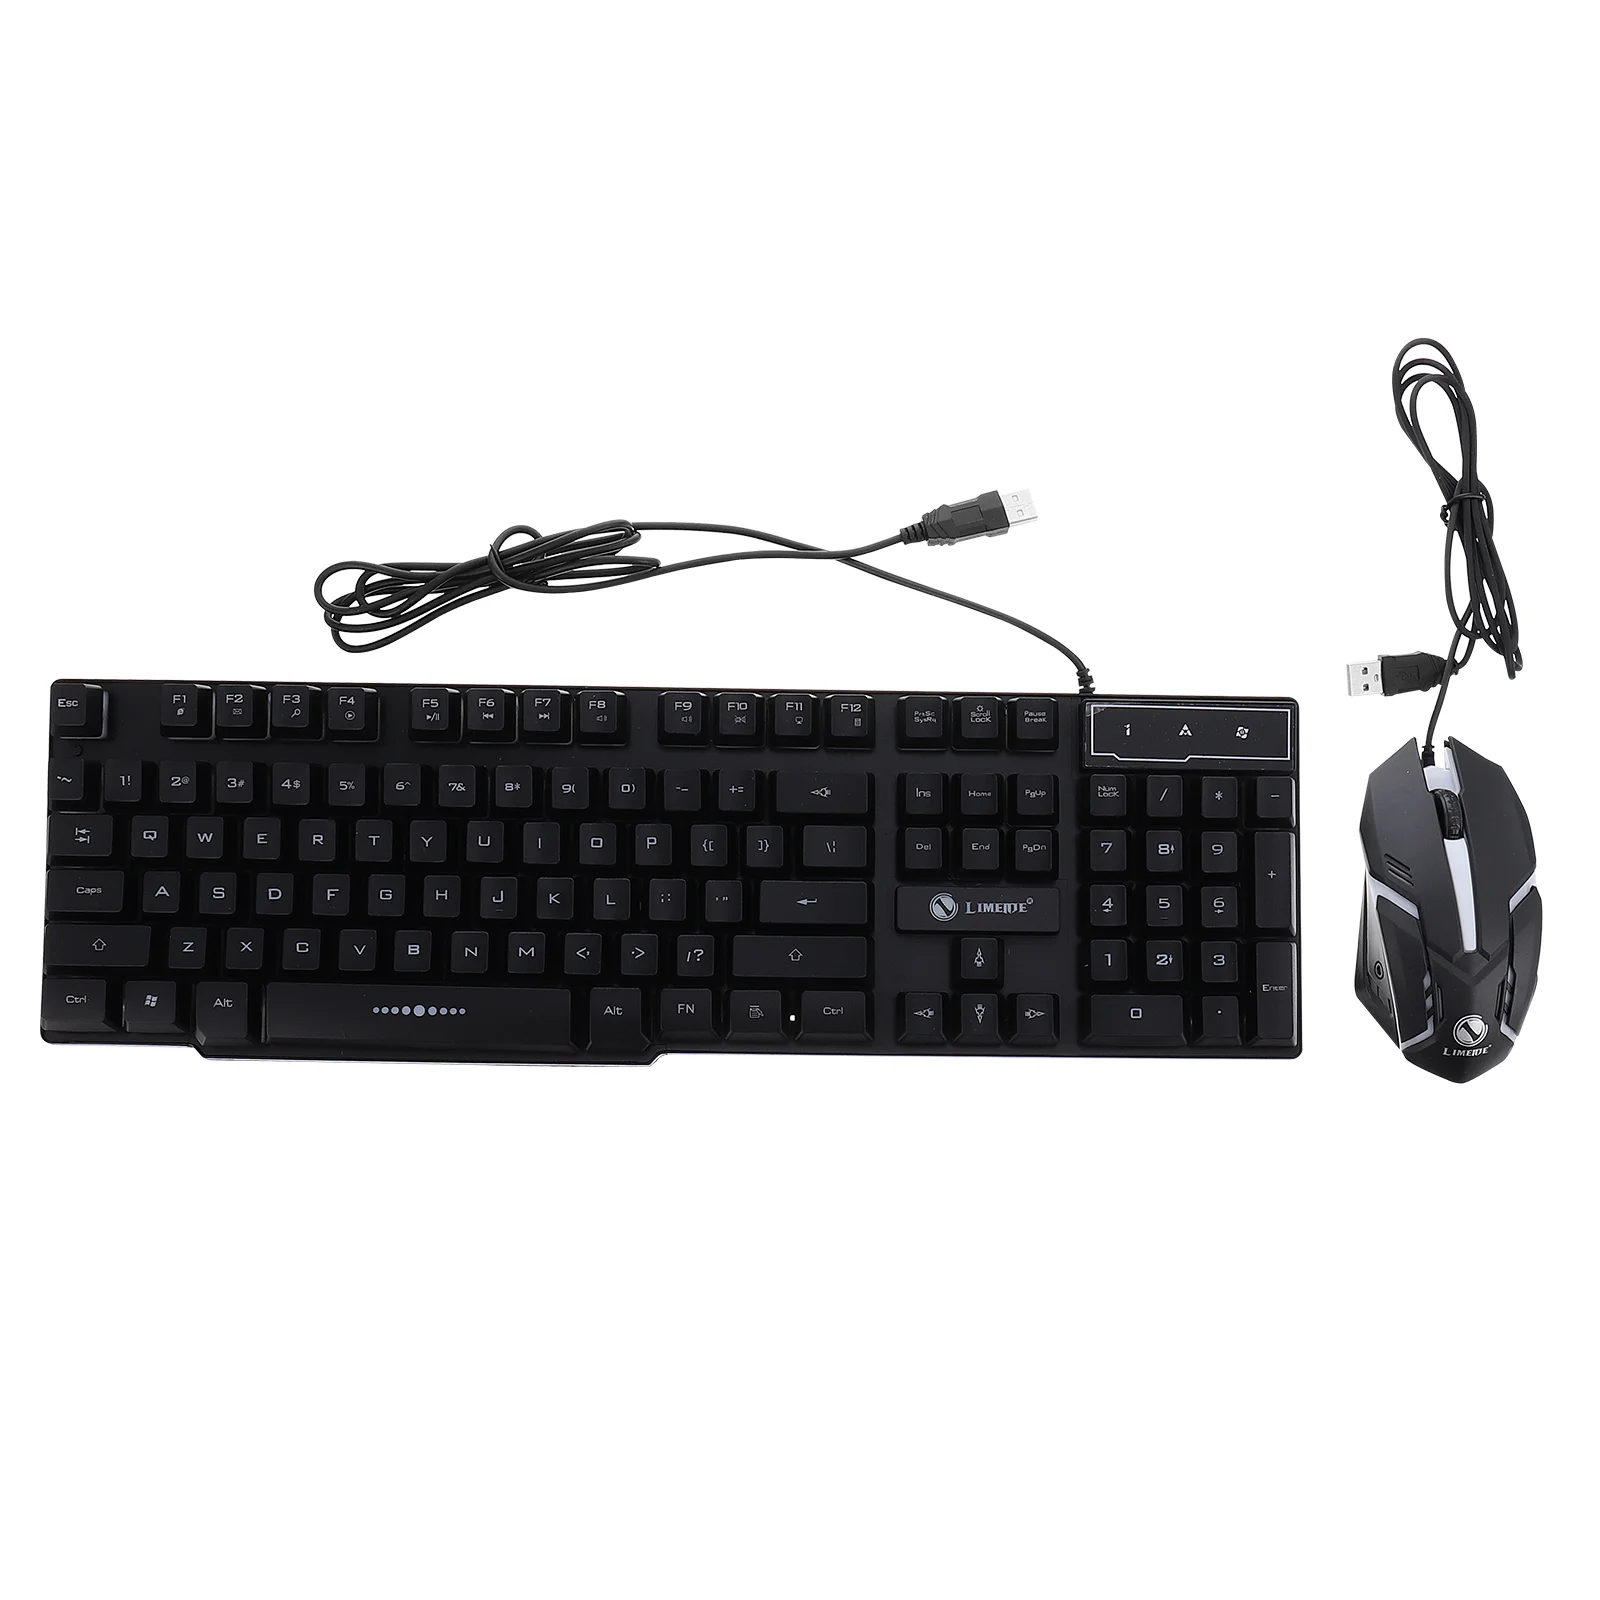 

Keyboard Wired Gaming Combo Computer Mouse Led Backlit Usb Glowing Ergonomic Mice Desktop Luminous Keyboards Accessories